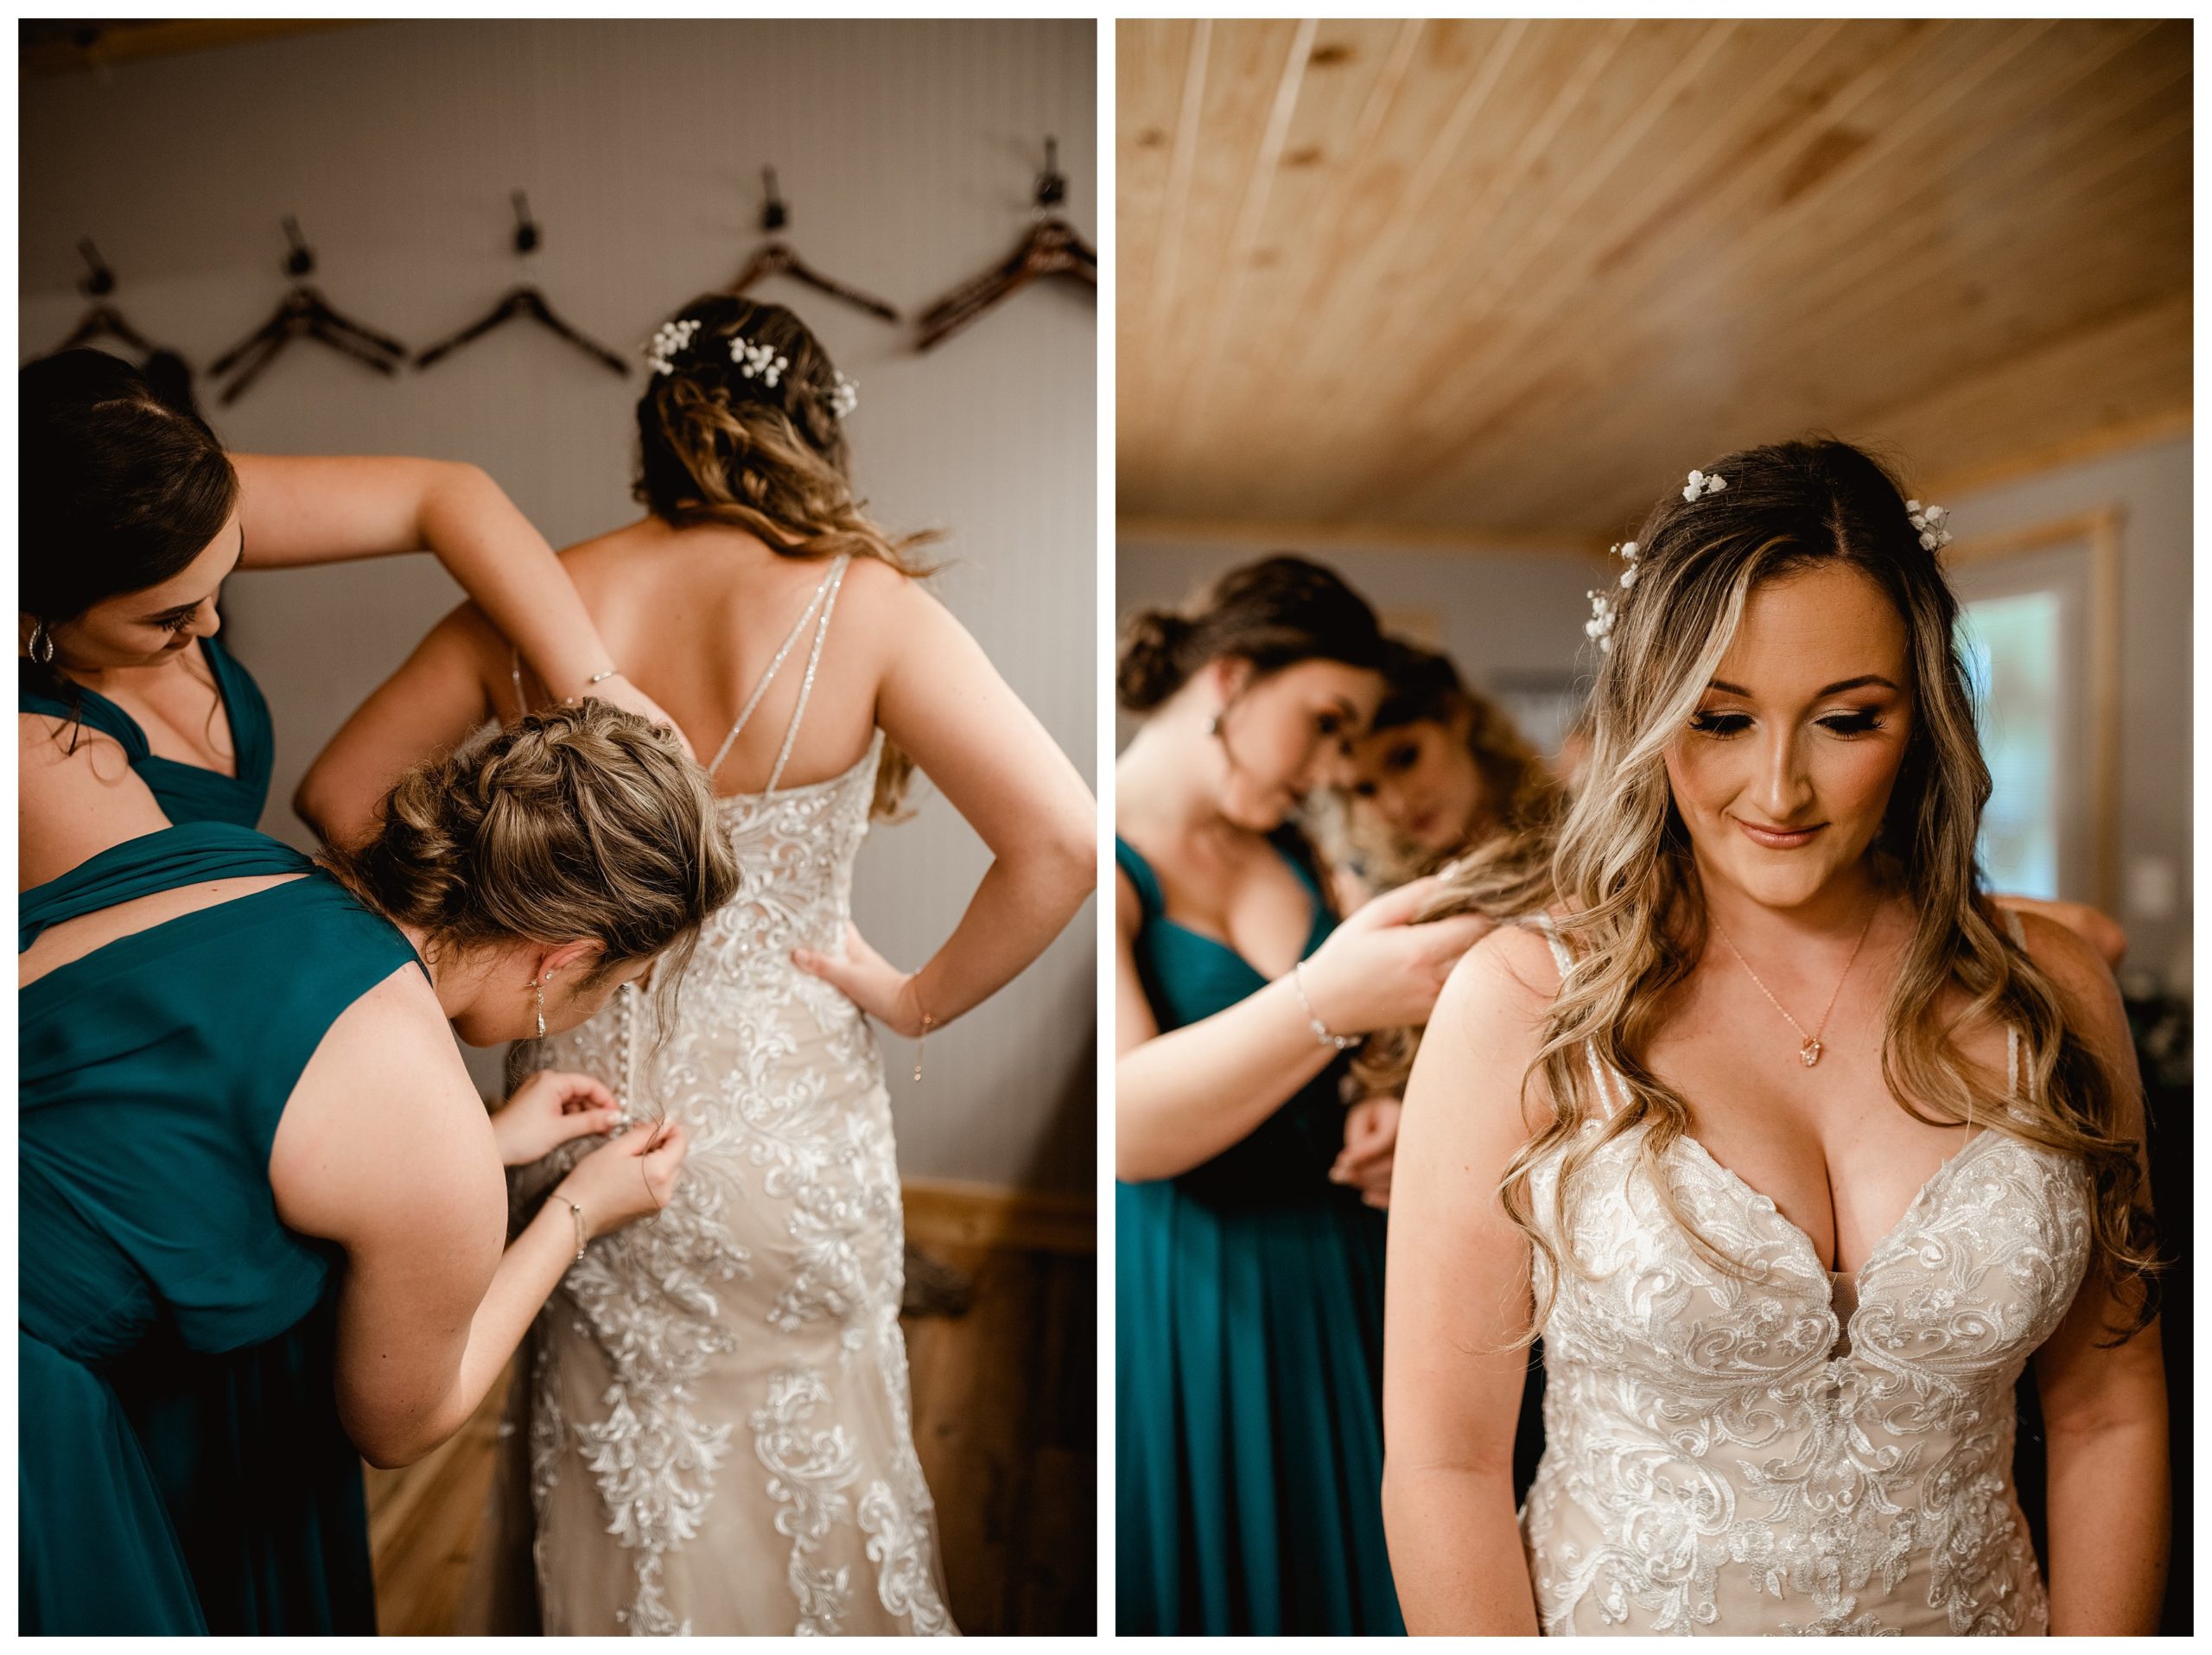 Bride getting in her wedding gown on her big day.